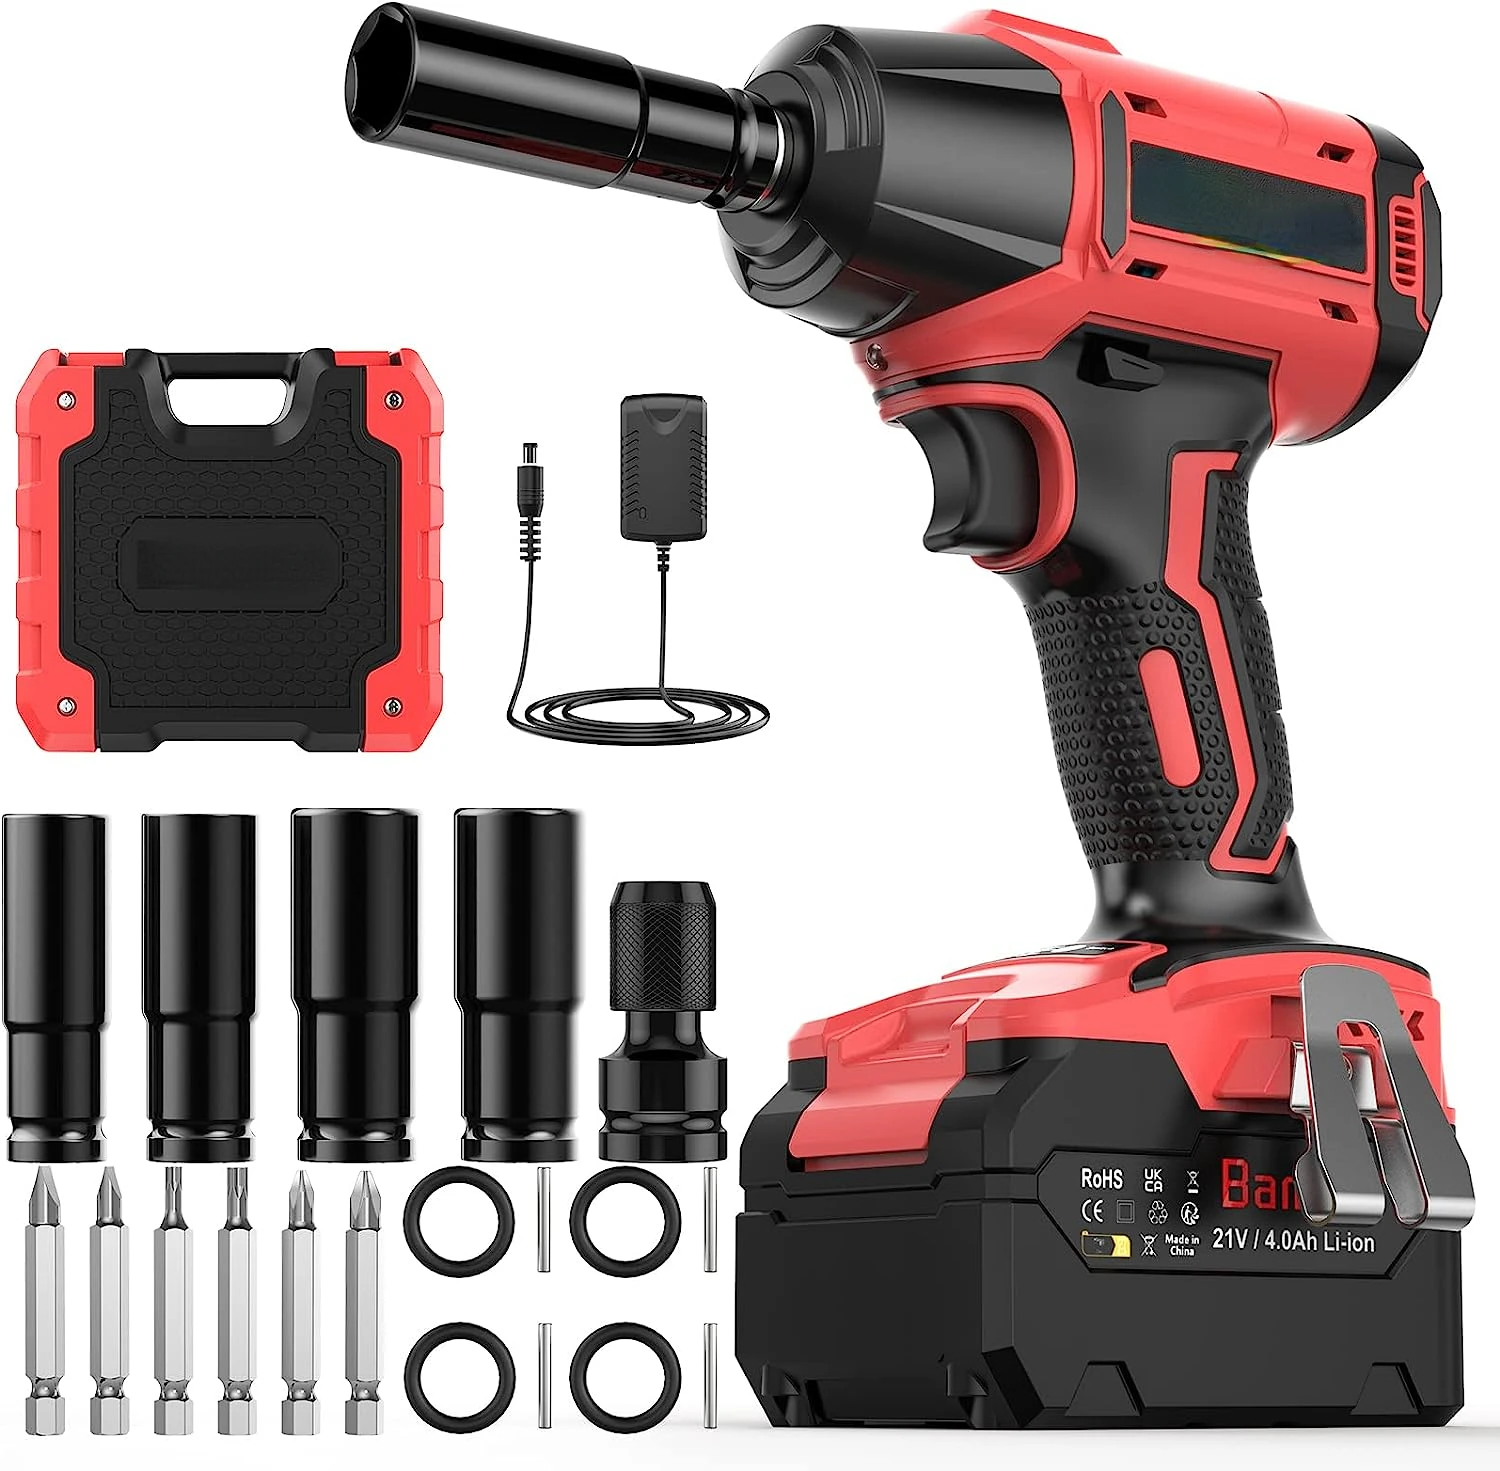 

Wrench Cordless, Brushless Power Gun 21V, 1/2'', 4.0Ah , 3200RPM & Max Torque 517 Ft-lbs (700N.m) with 4 Sockets,